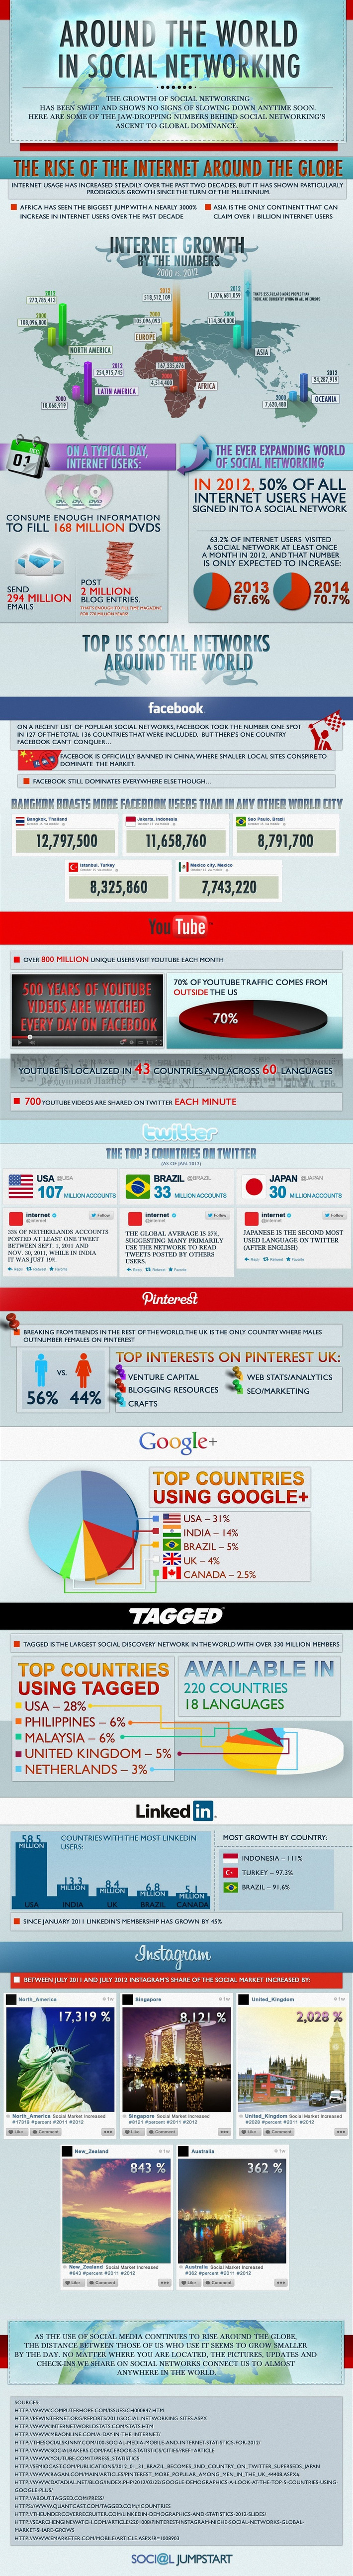 Social Networking Around the World | A Marketing Mix | Scoop.it